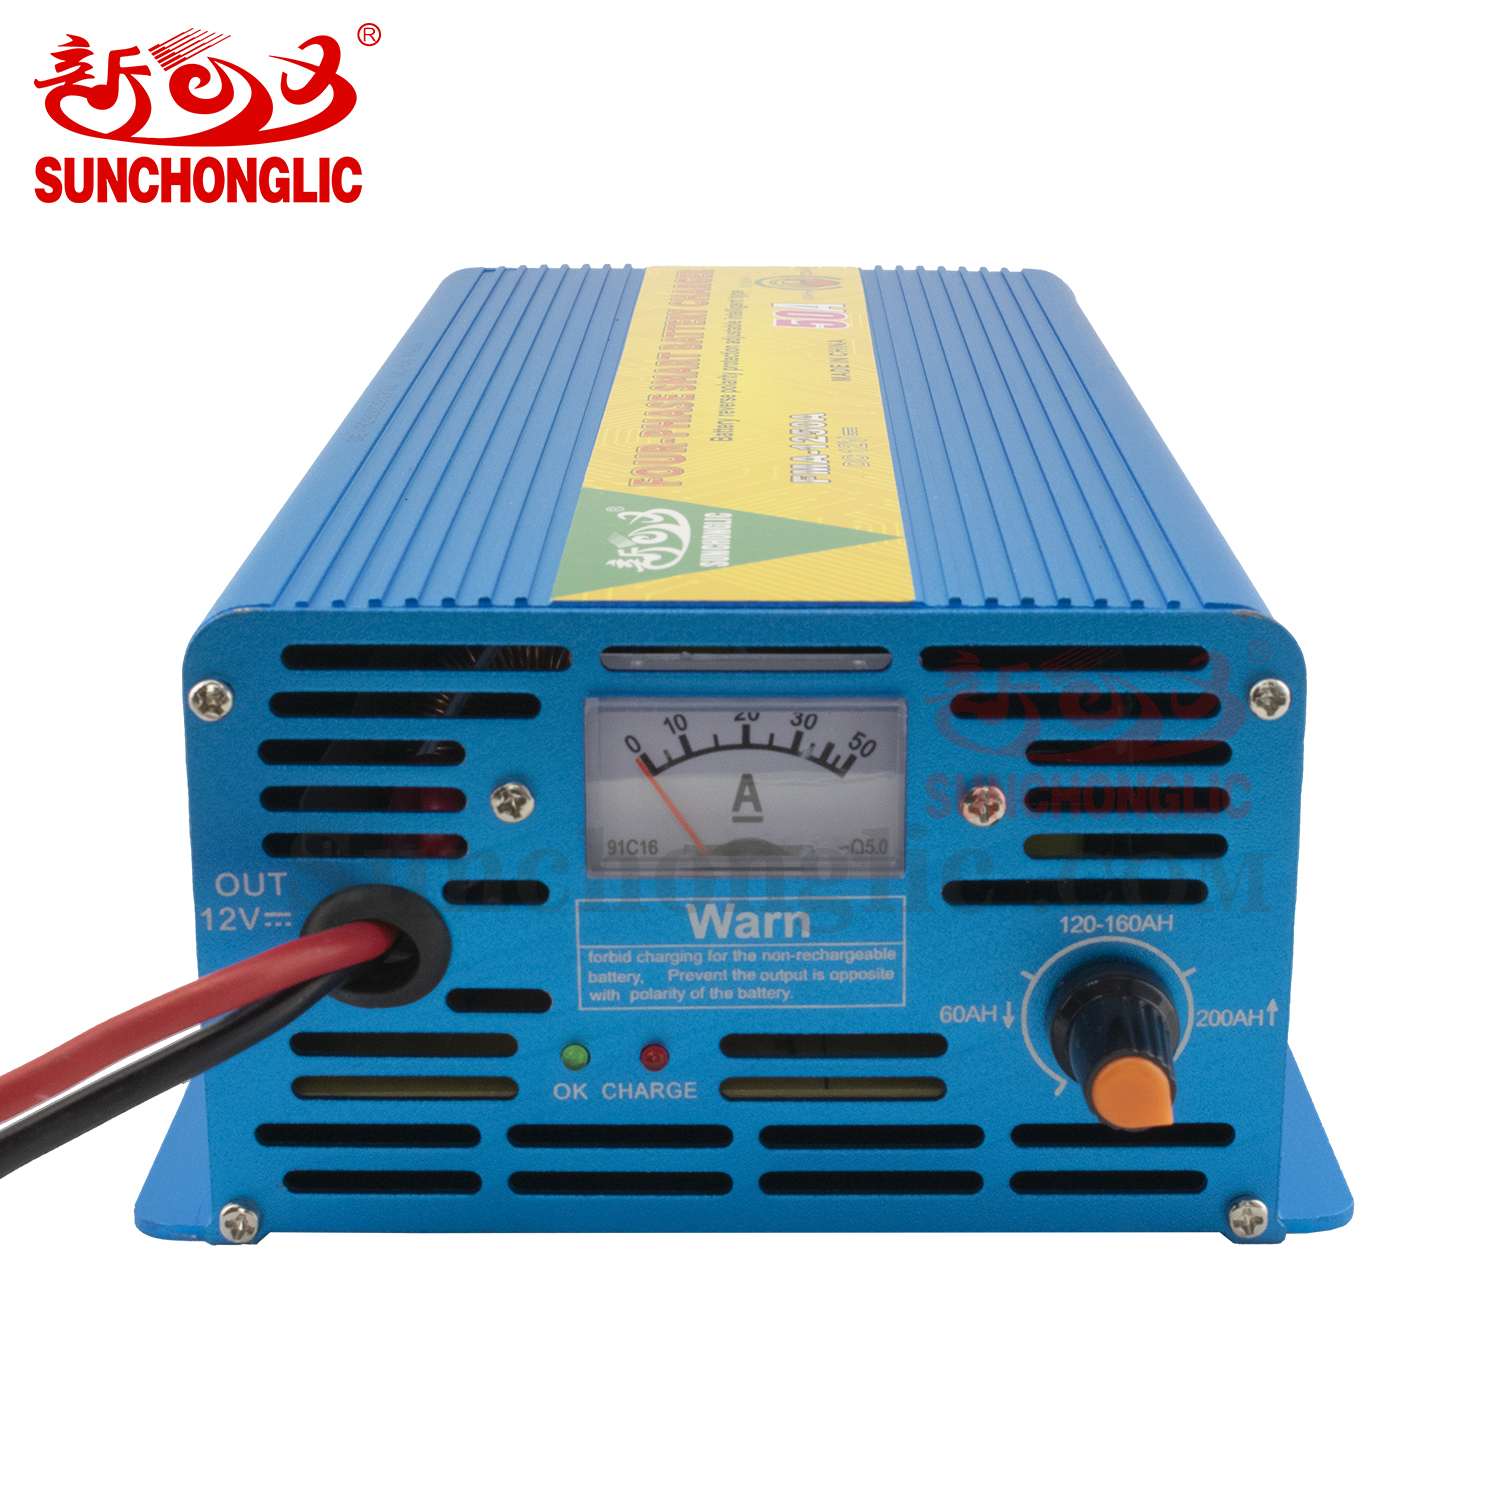 MA-1220A - AGM/GEL Battery Charger - Foshan Suoer Electronic Industry  Co.,Ltd.